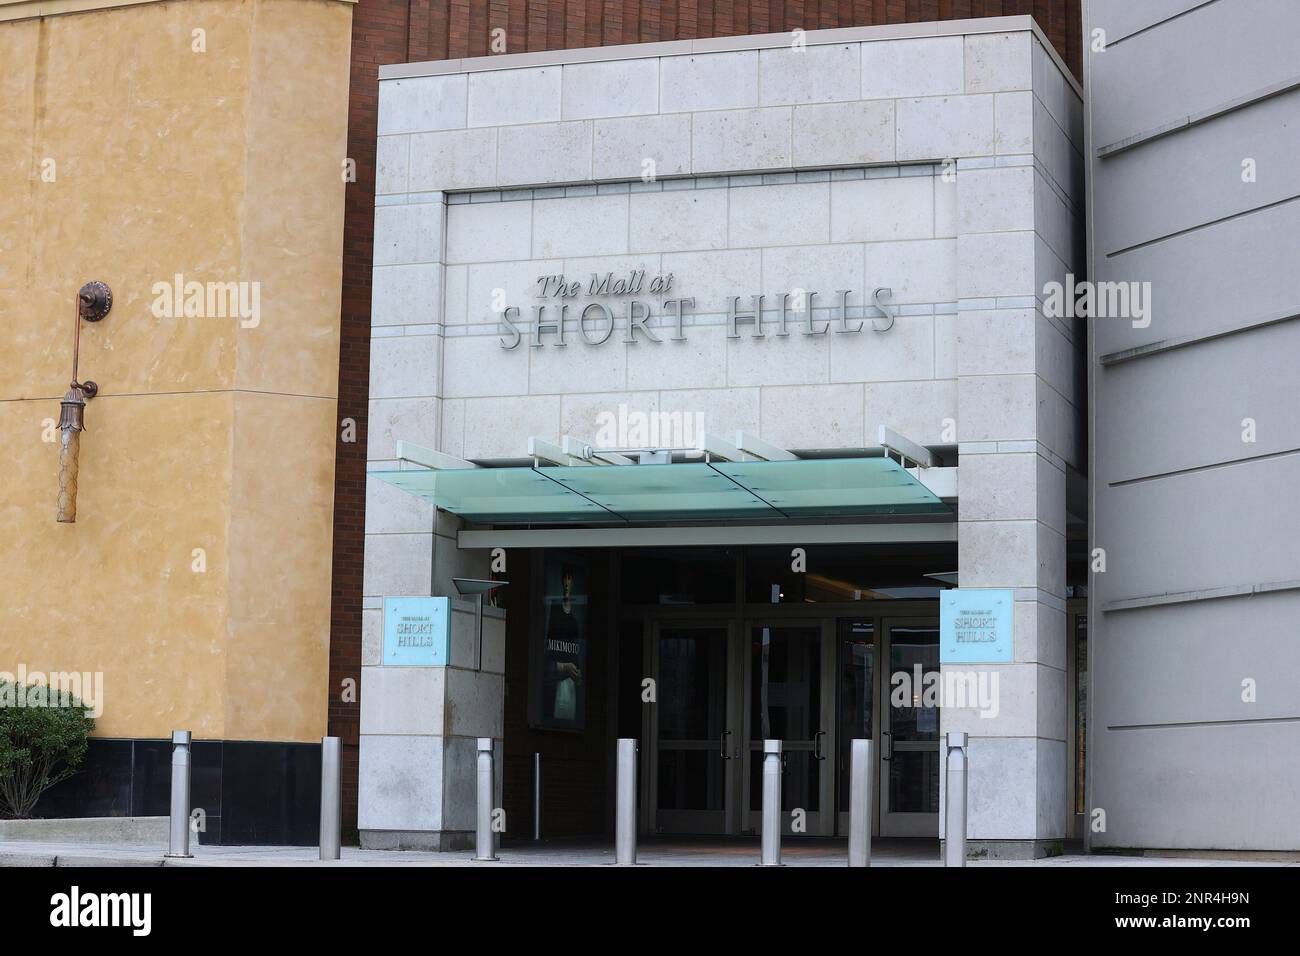 SHORT HILLS, NJ - MARCH 31: A general view of entrance at the Mall at Short  Hills, the Mall is closed as a result of the economic impact of the  shutdown caused